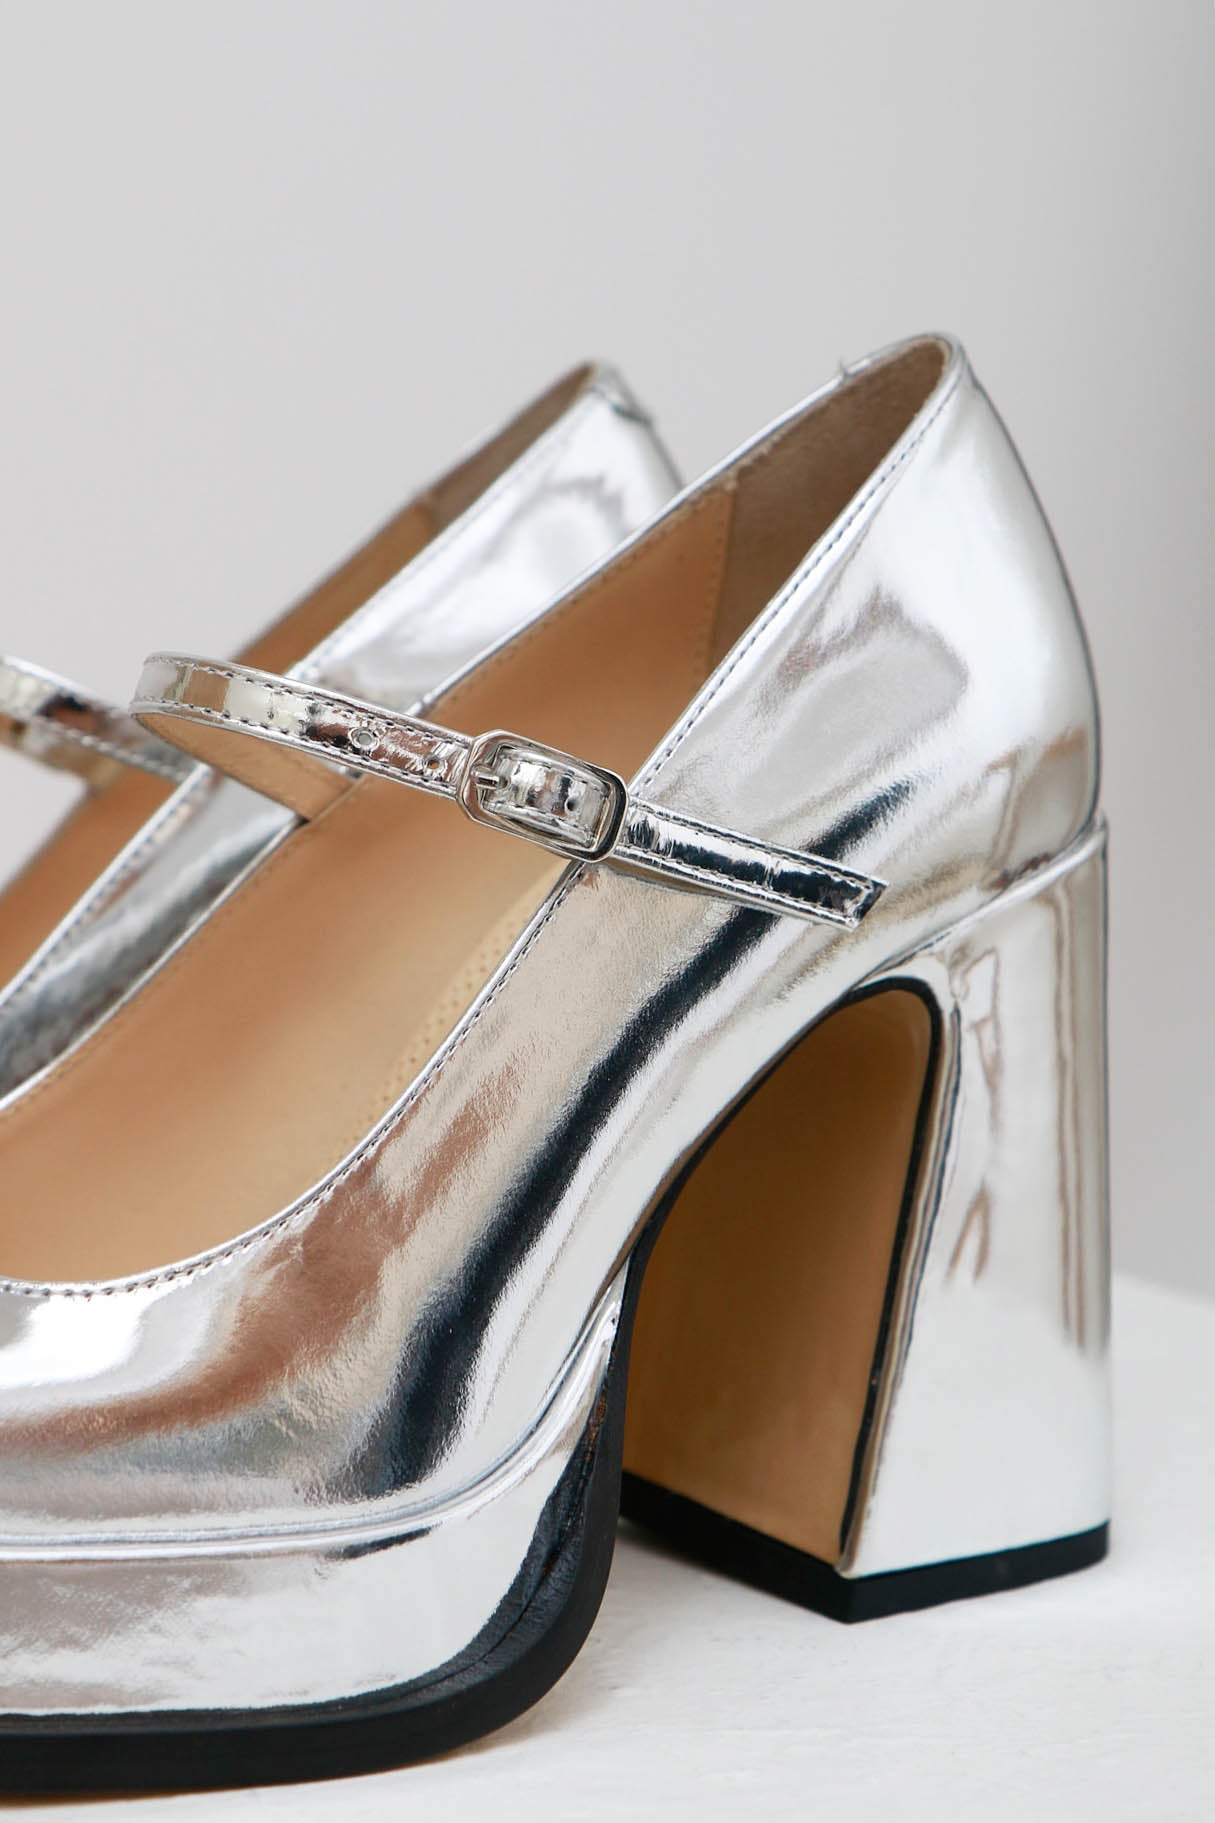 Souliers Martinez Shoes CASILDA - Silver Mirror Leather Mary Jane Pumps 